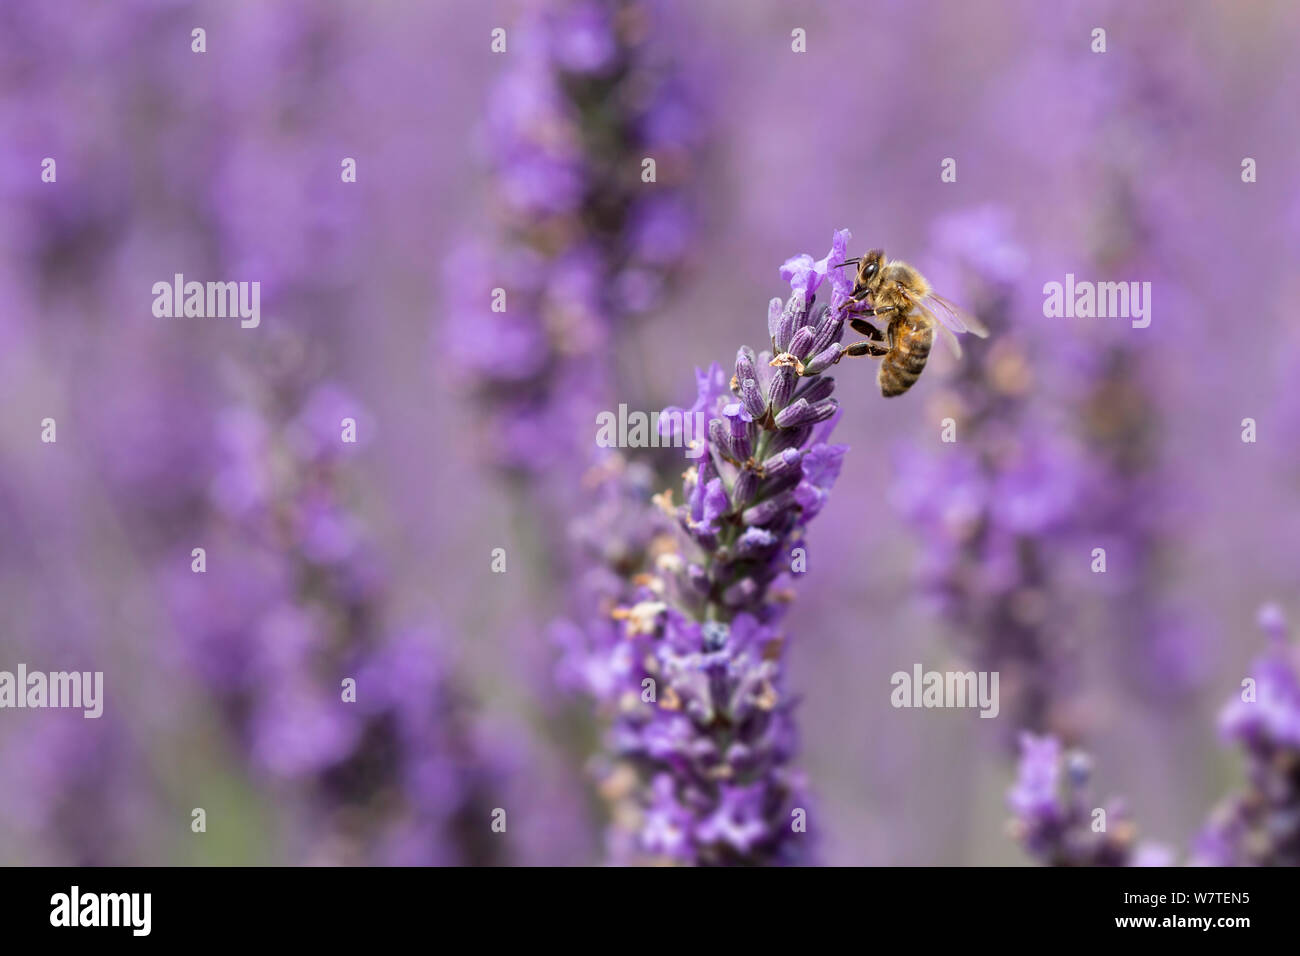 Close up of a Honey Bee, apis mellifera, on lavender flowers Stock Photo